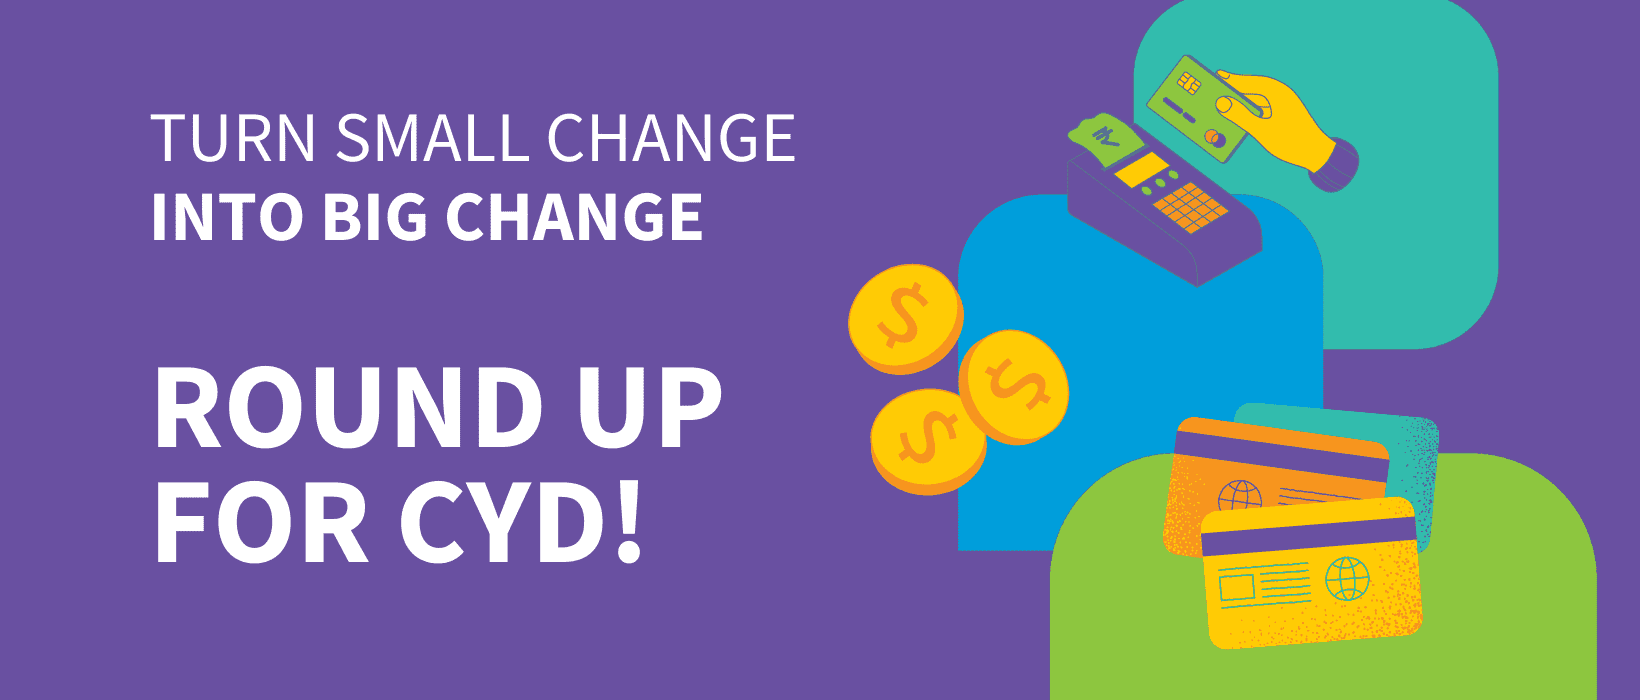 Turn small change into BIG CHANGE - Round up for CYD!